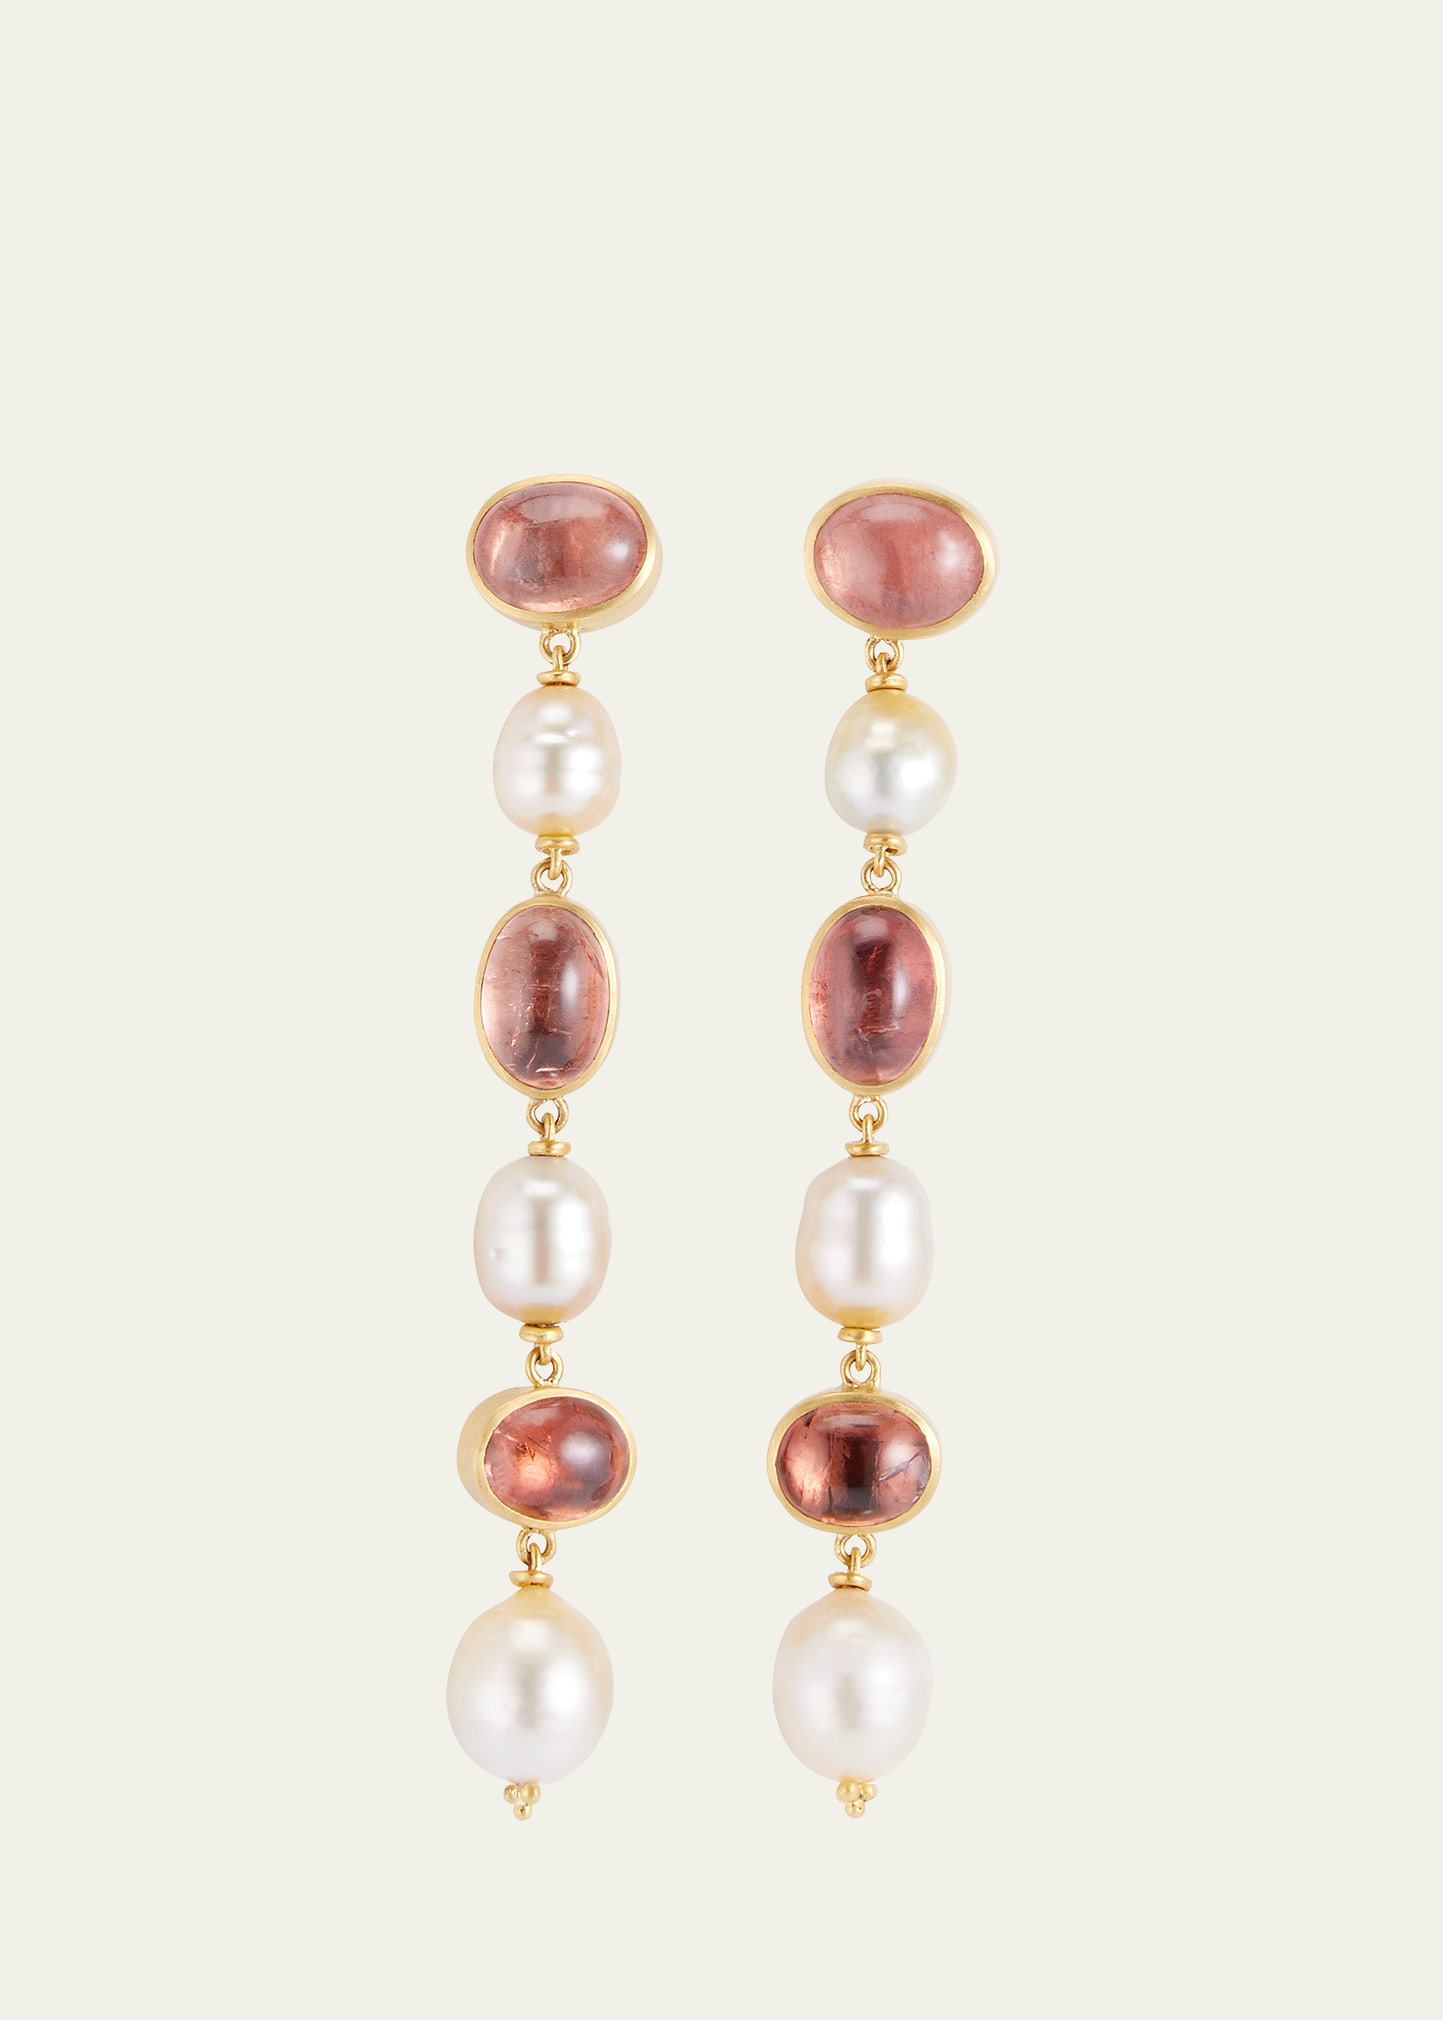 Blush Tourmaline and Golden South Sea Pearl Chime Drop Earrings